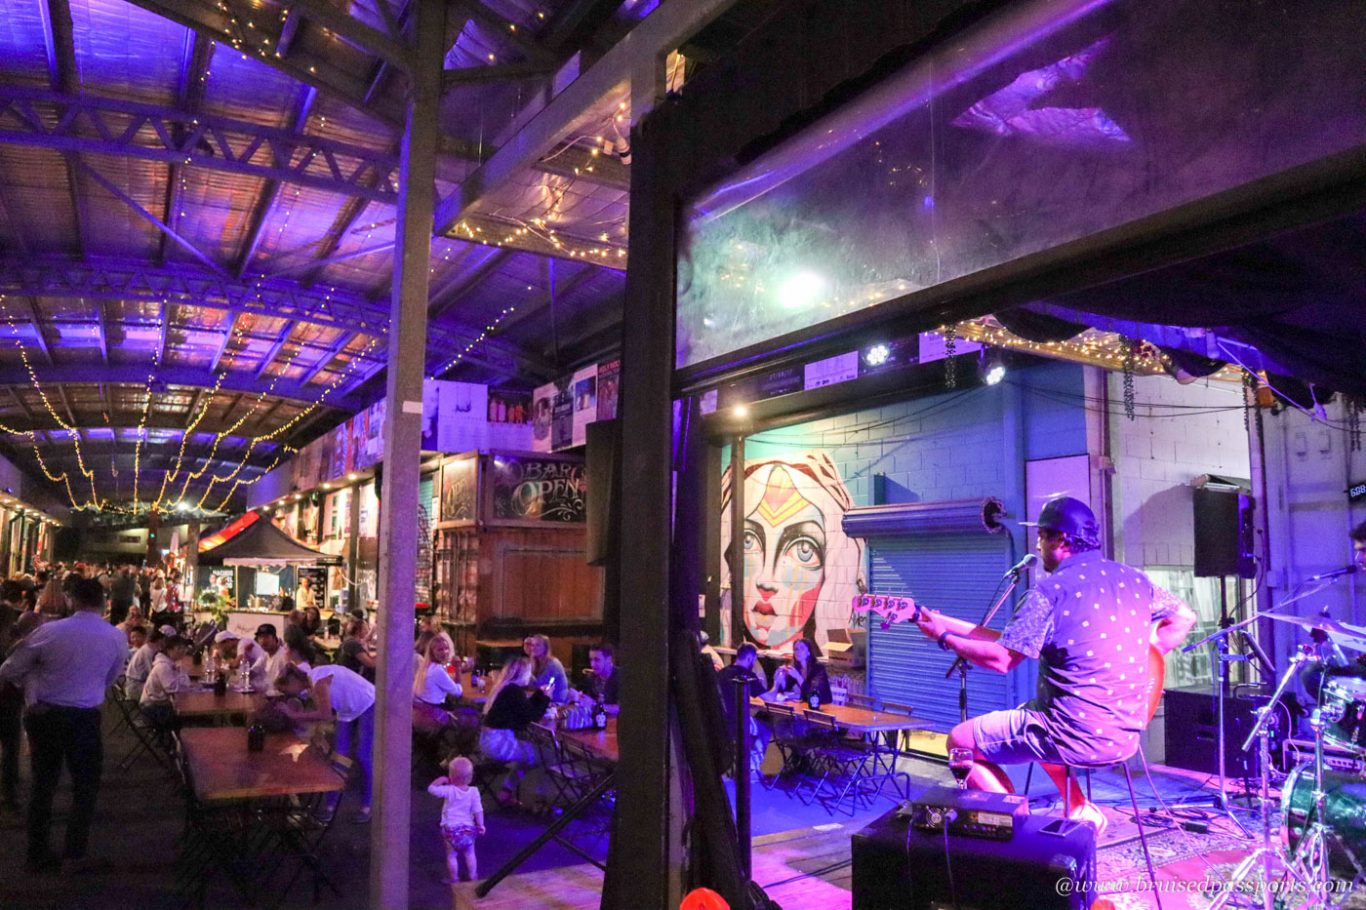 Live music and food at Miami Marketta